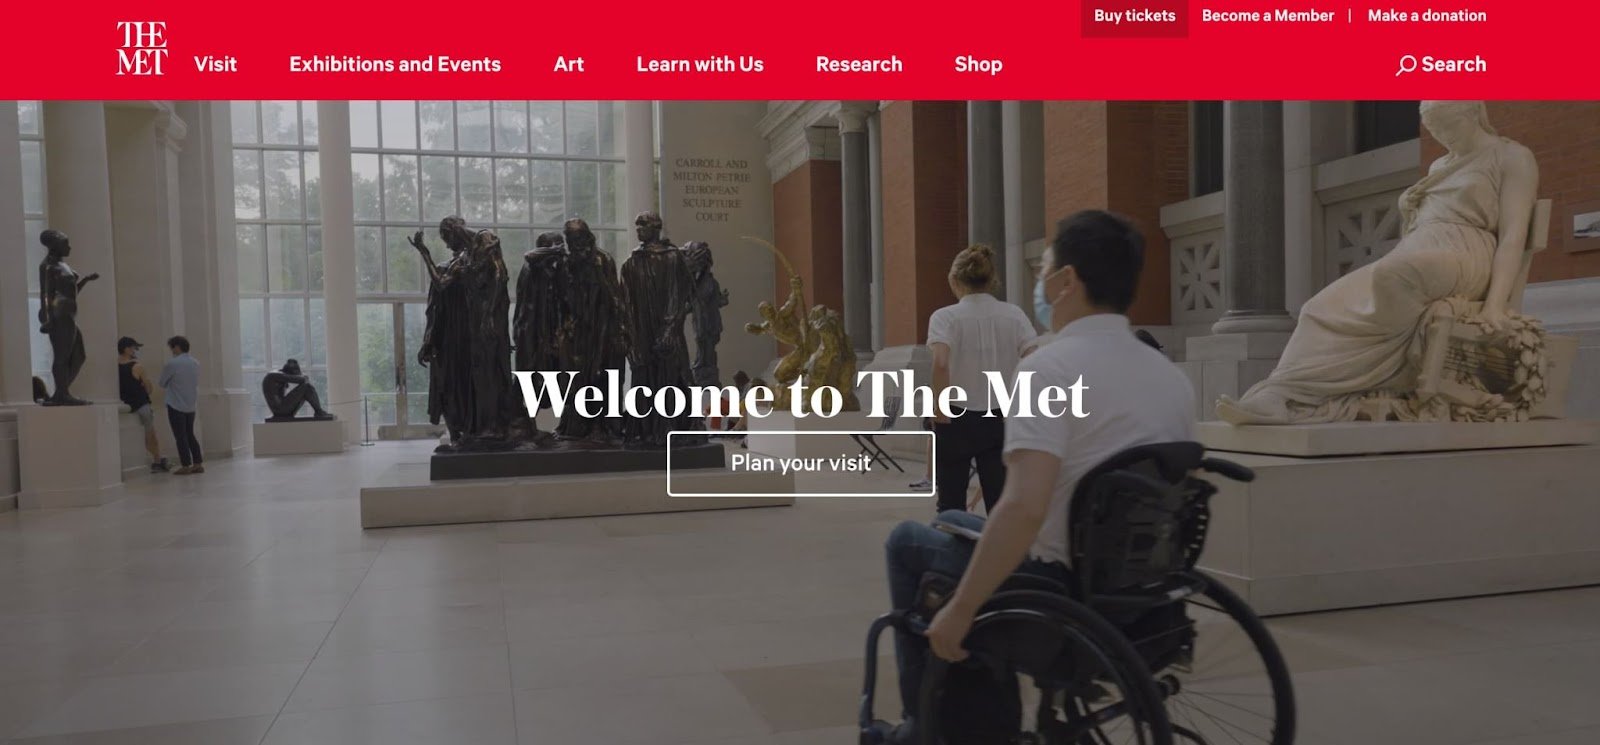 homepage for the museum website the met